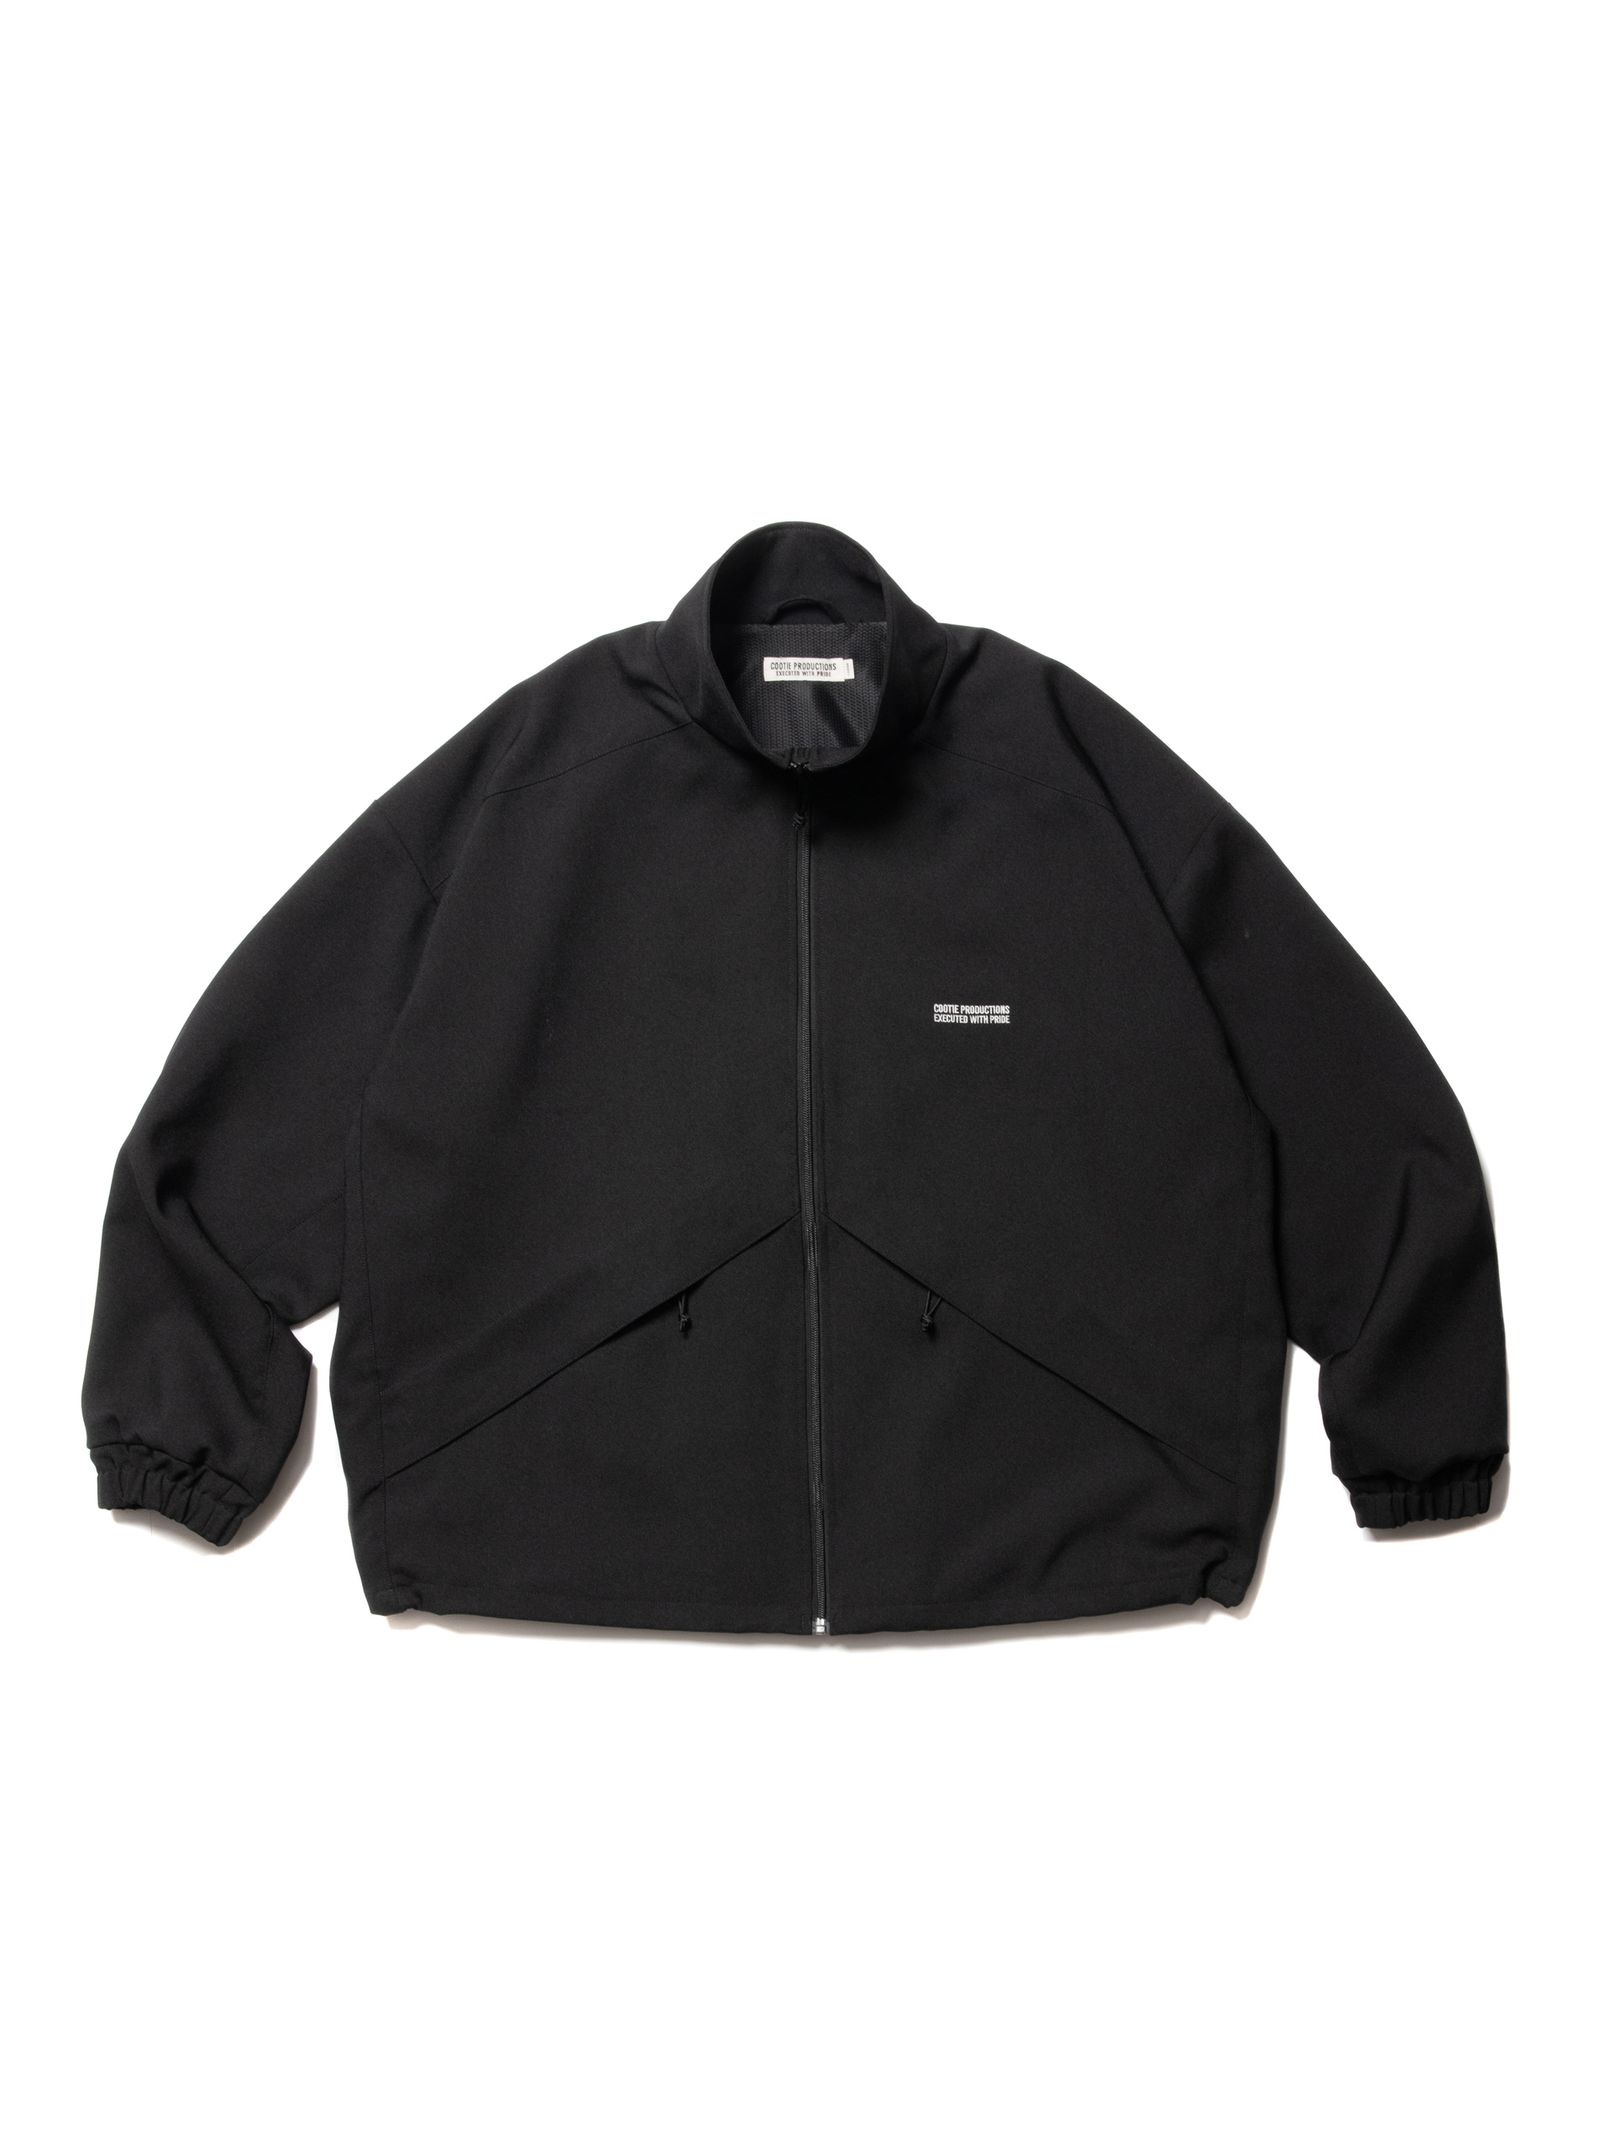 COOTIE PRODUCTIONS - Polyester OX Raza Track Jacket (BLACK